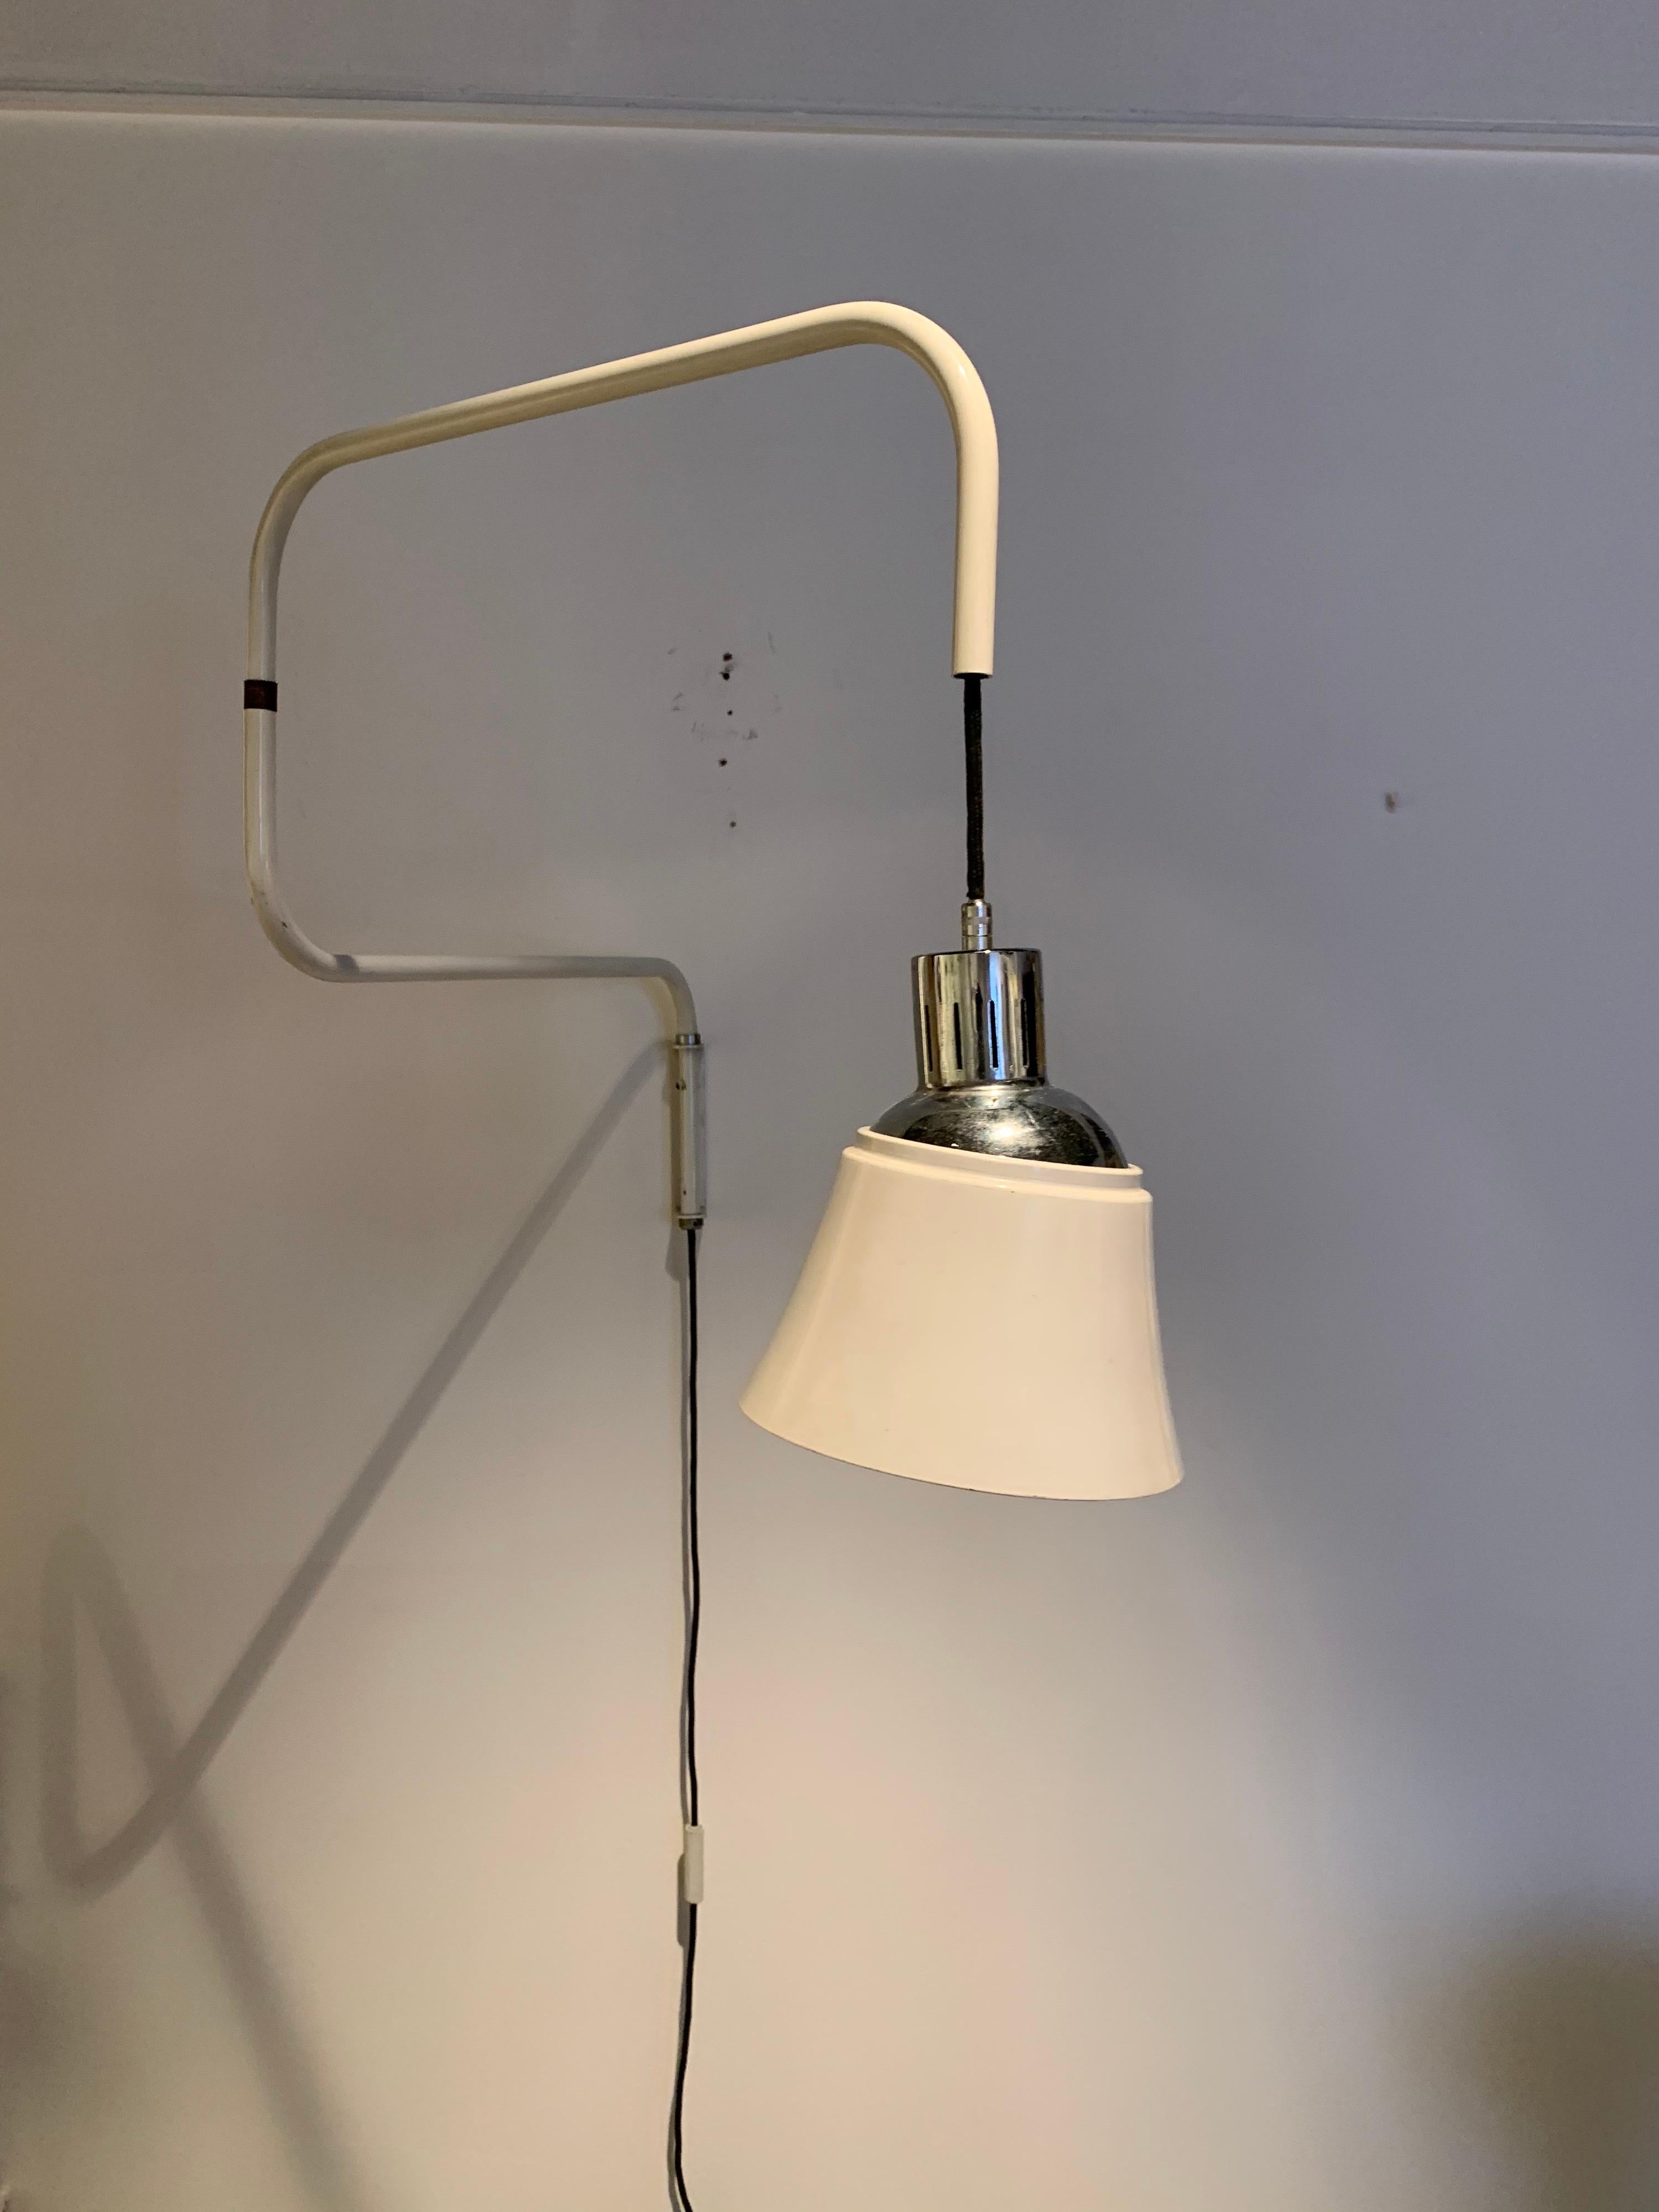 The Original model was designed and prouduced in the 1930s by the German designer Heinrich Bormann. This model dates circa 1950. It is the second edition edited the Italy Company Ugo Pollice. 
The lamp has its original wiring.